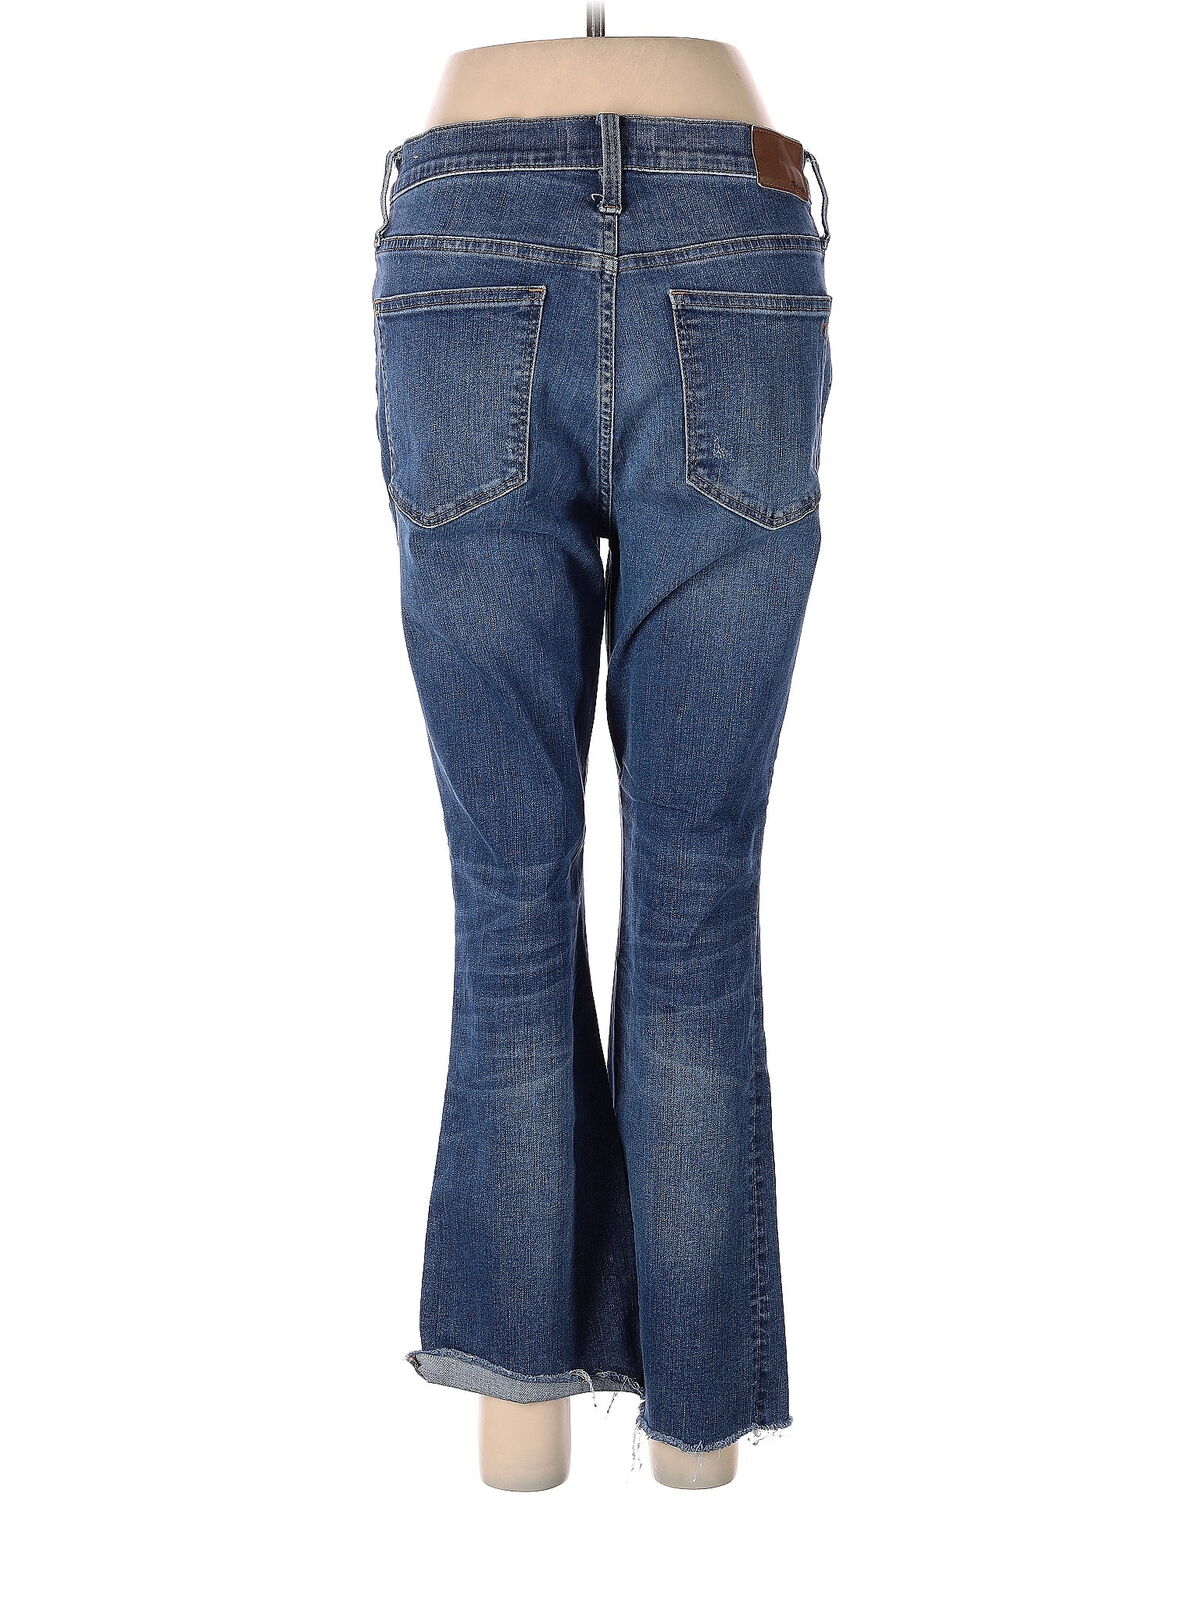 Madewell Women Blue Jeans 29W - image 2